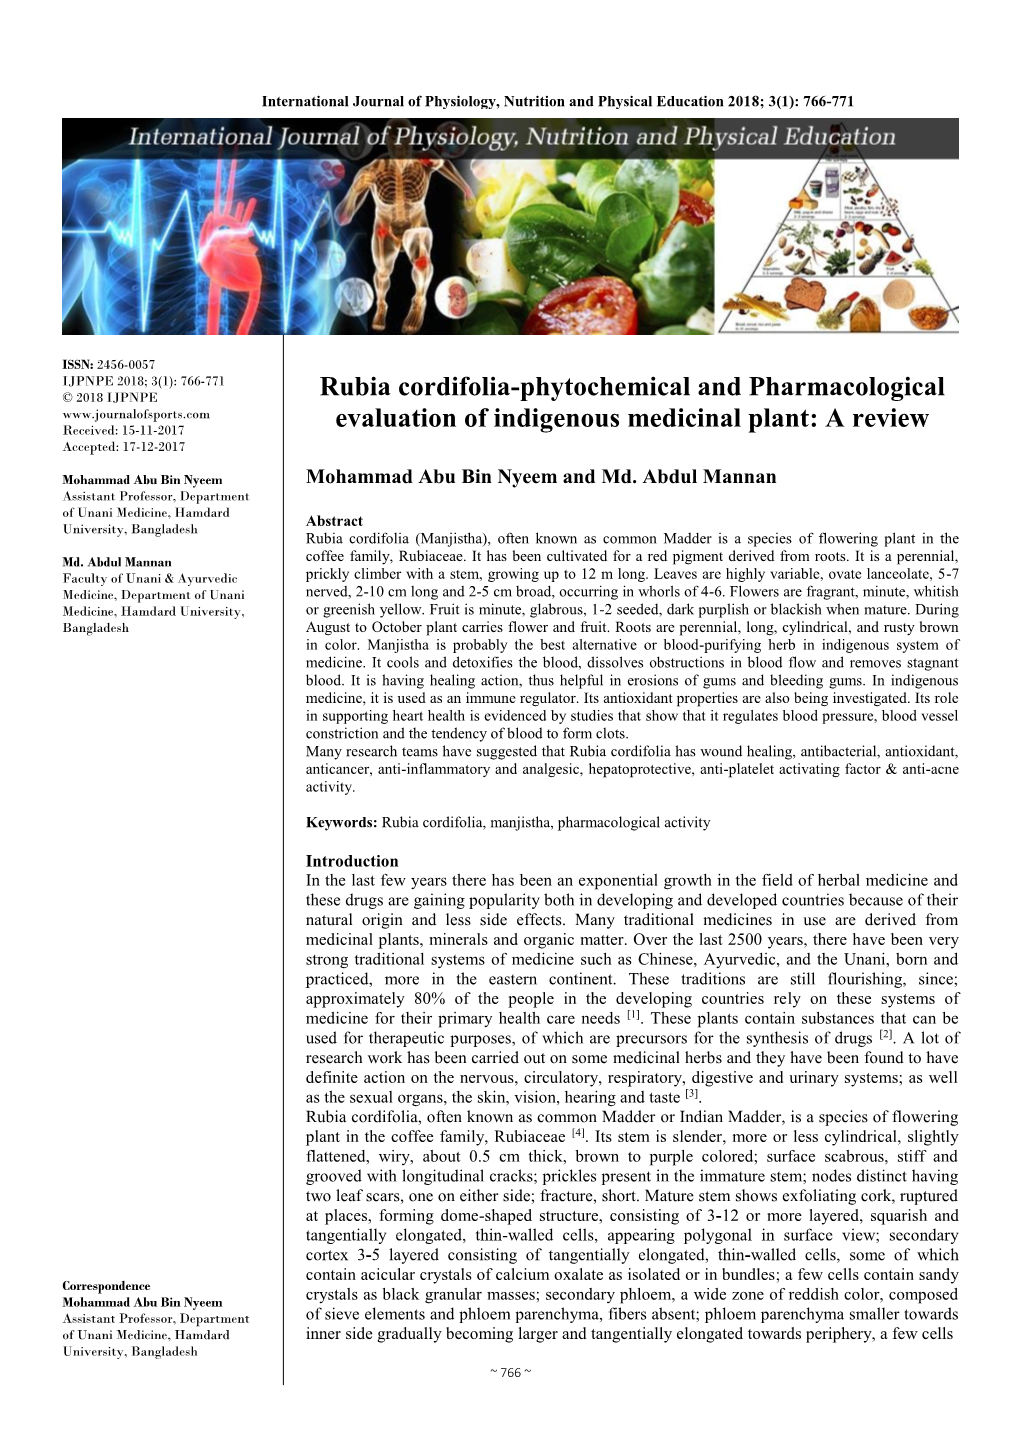 Rubia Cordifolia-Phytochemical and Pharmacological Evaluation of Indigenous Medicinal Plant